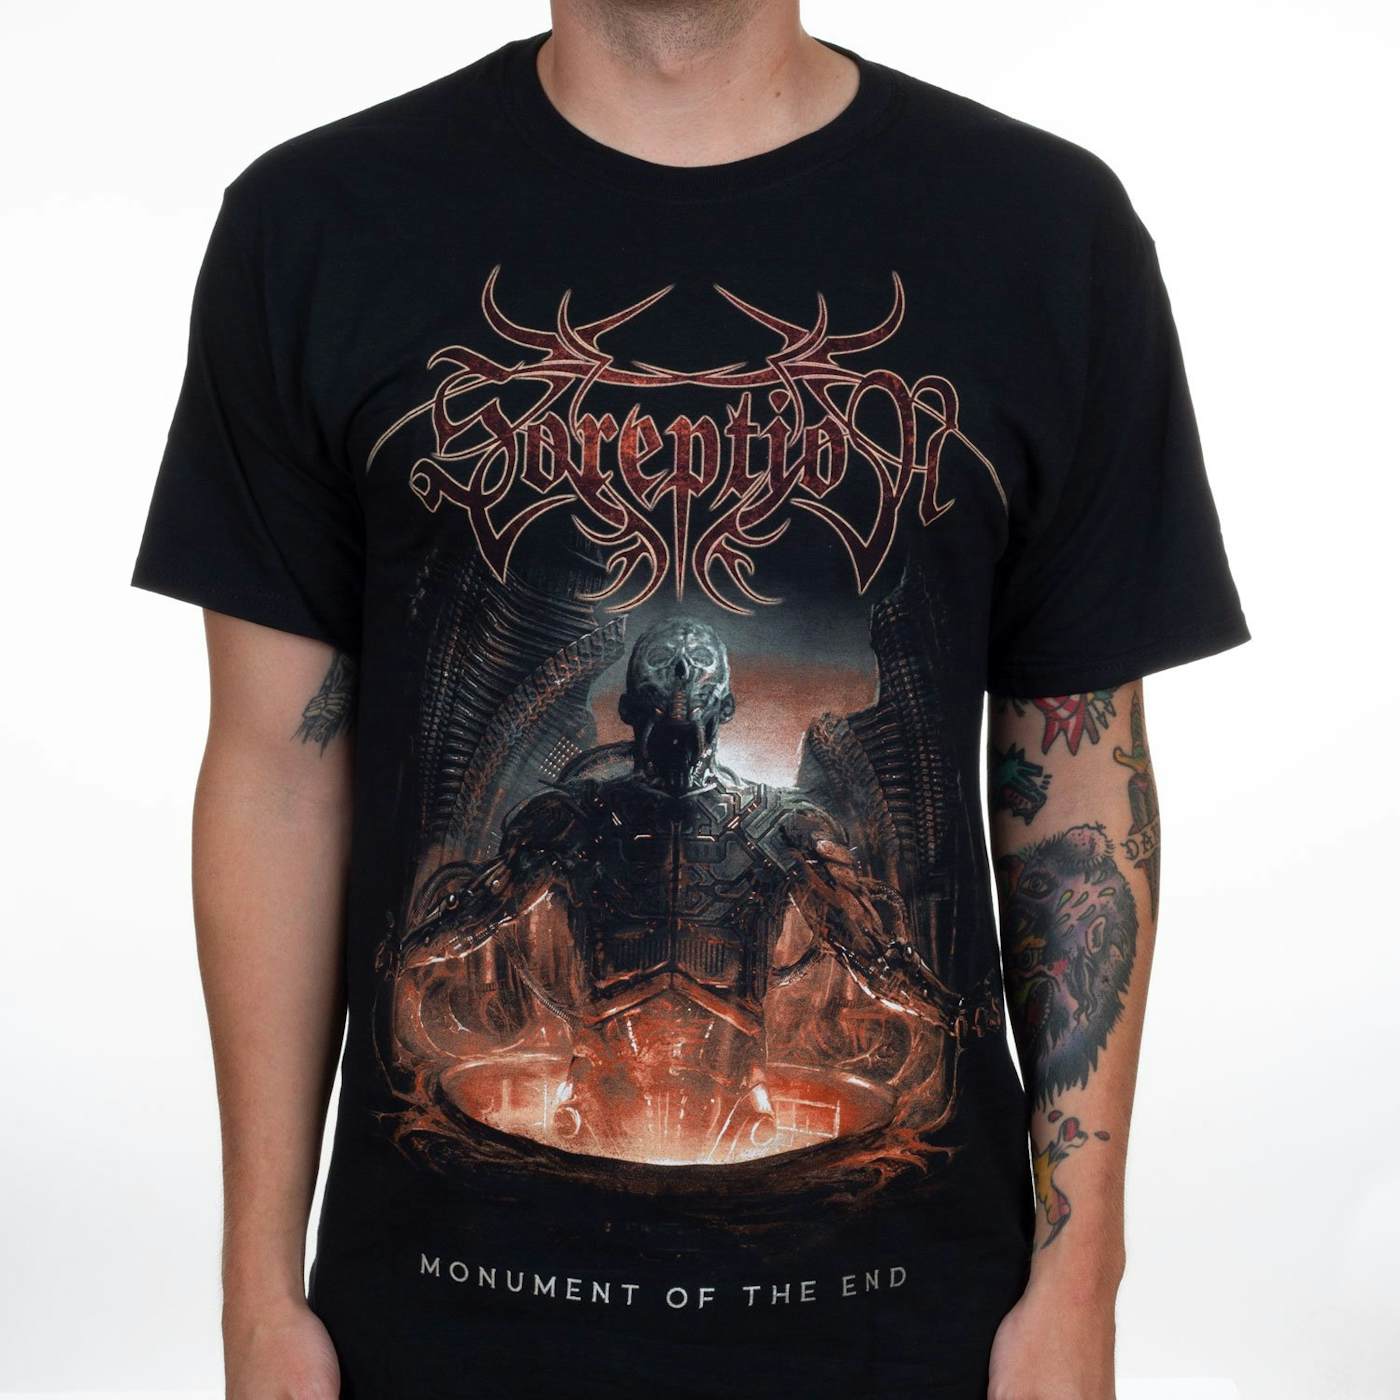 Soreption "Monument Of The End" T-Shirt